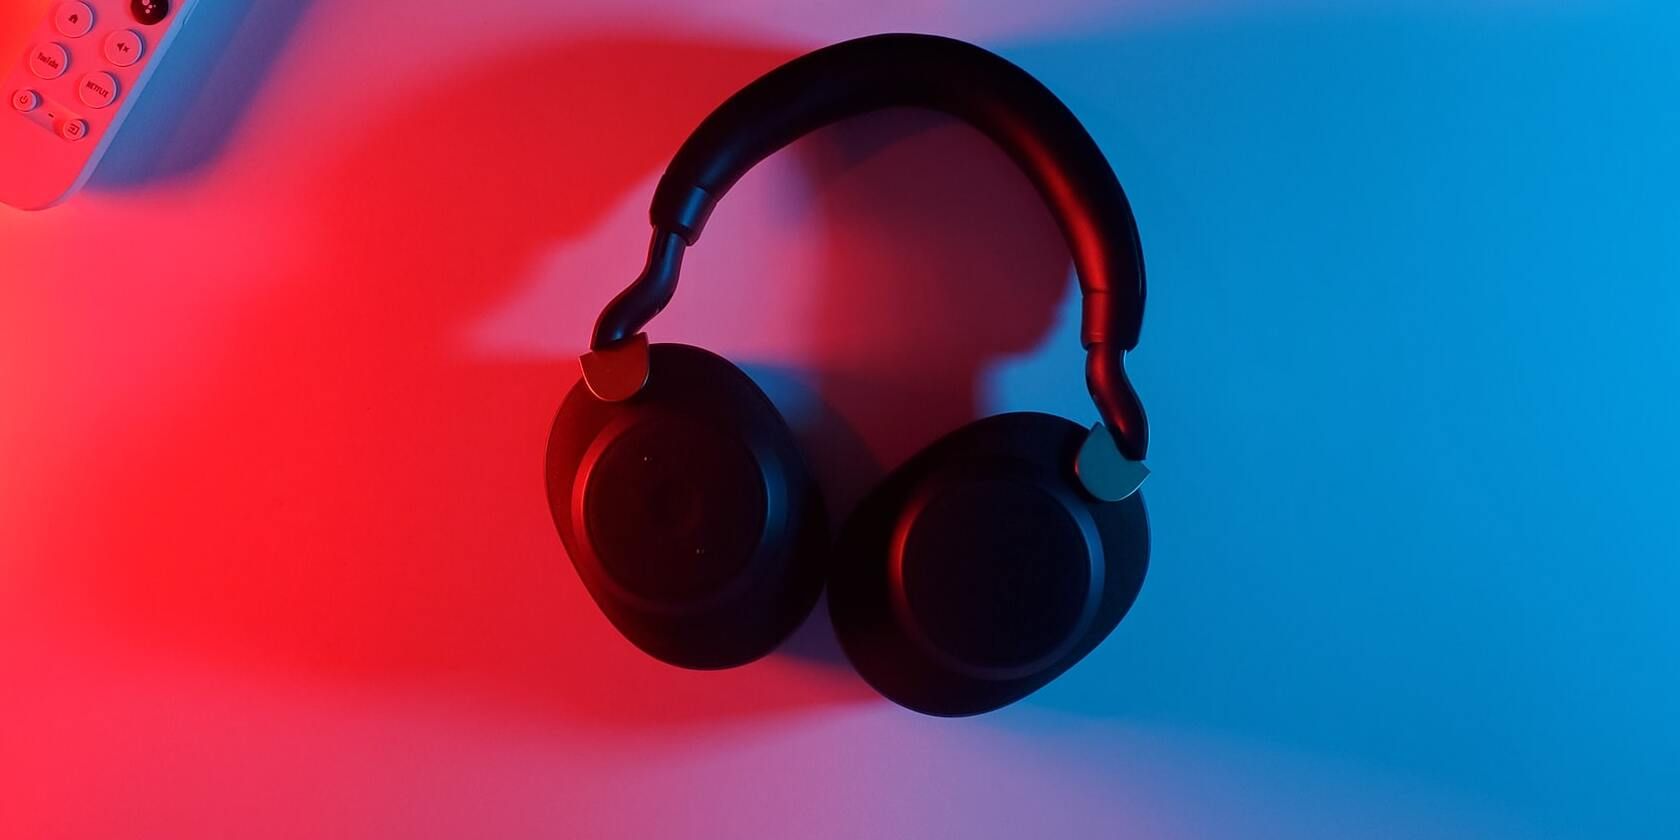 Image of headphones on a red and blue background